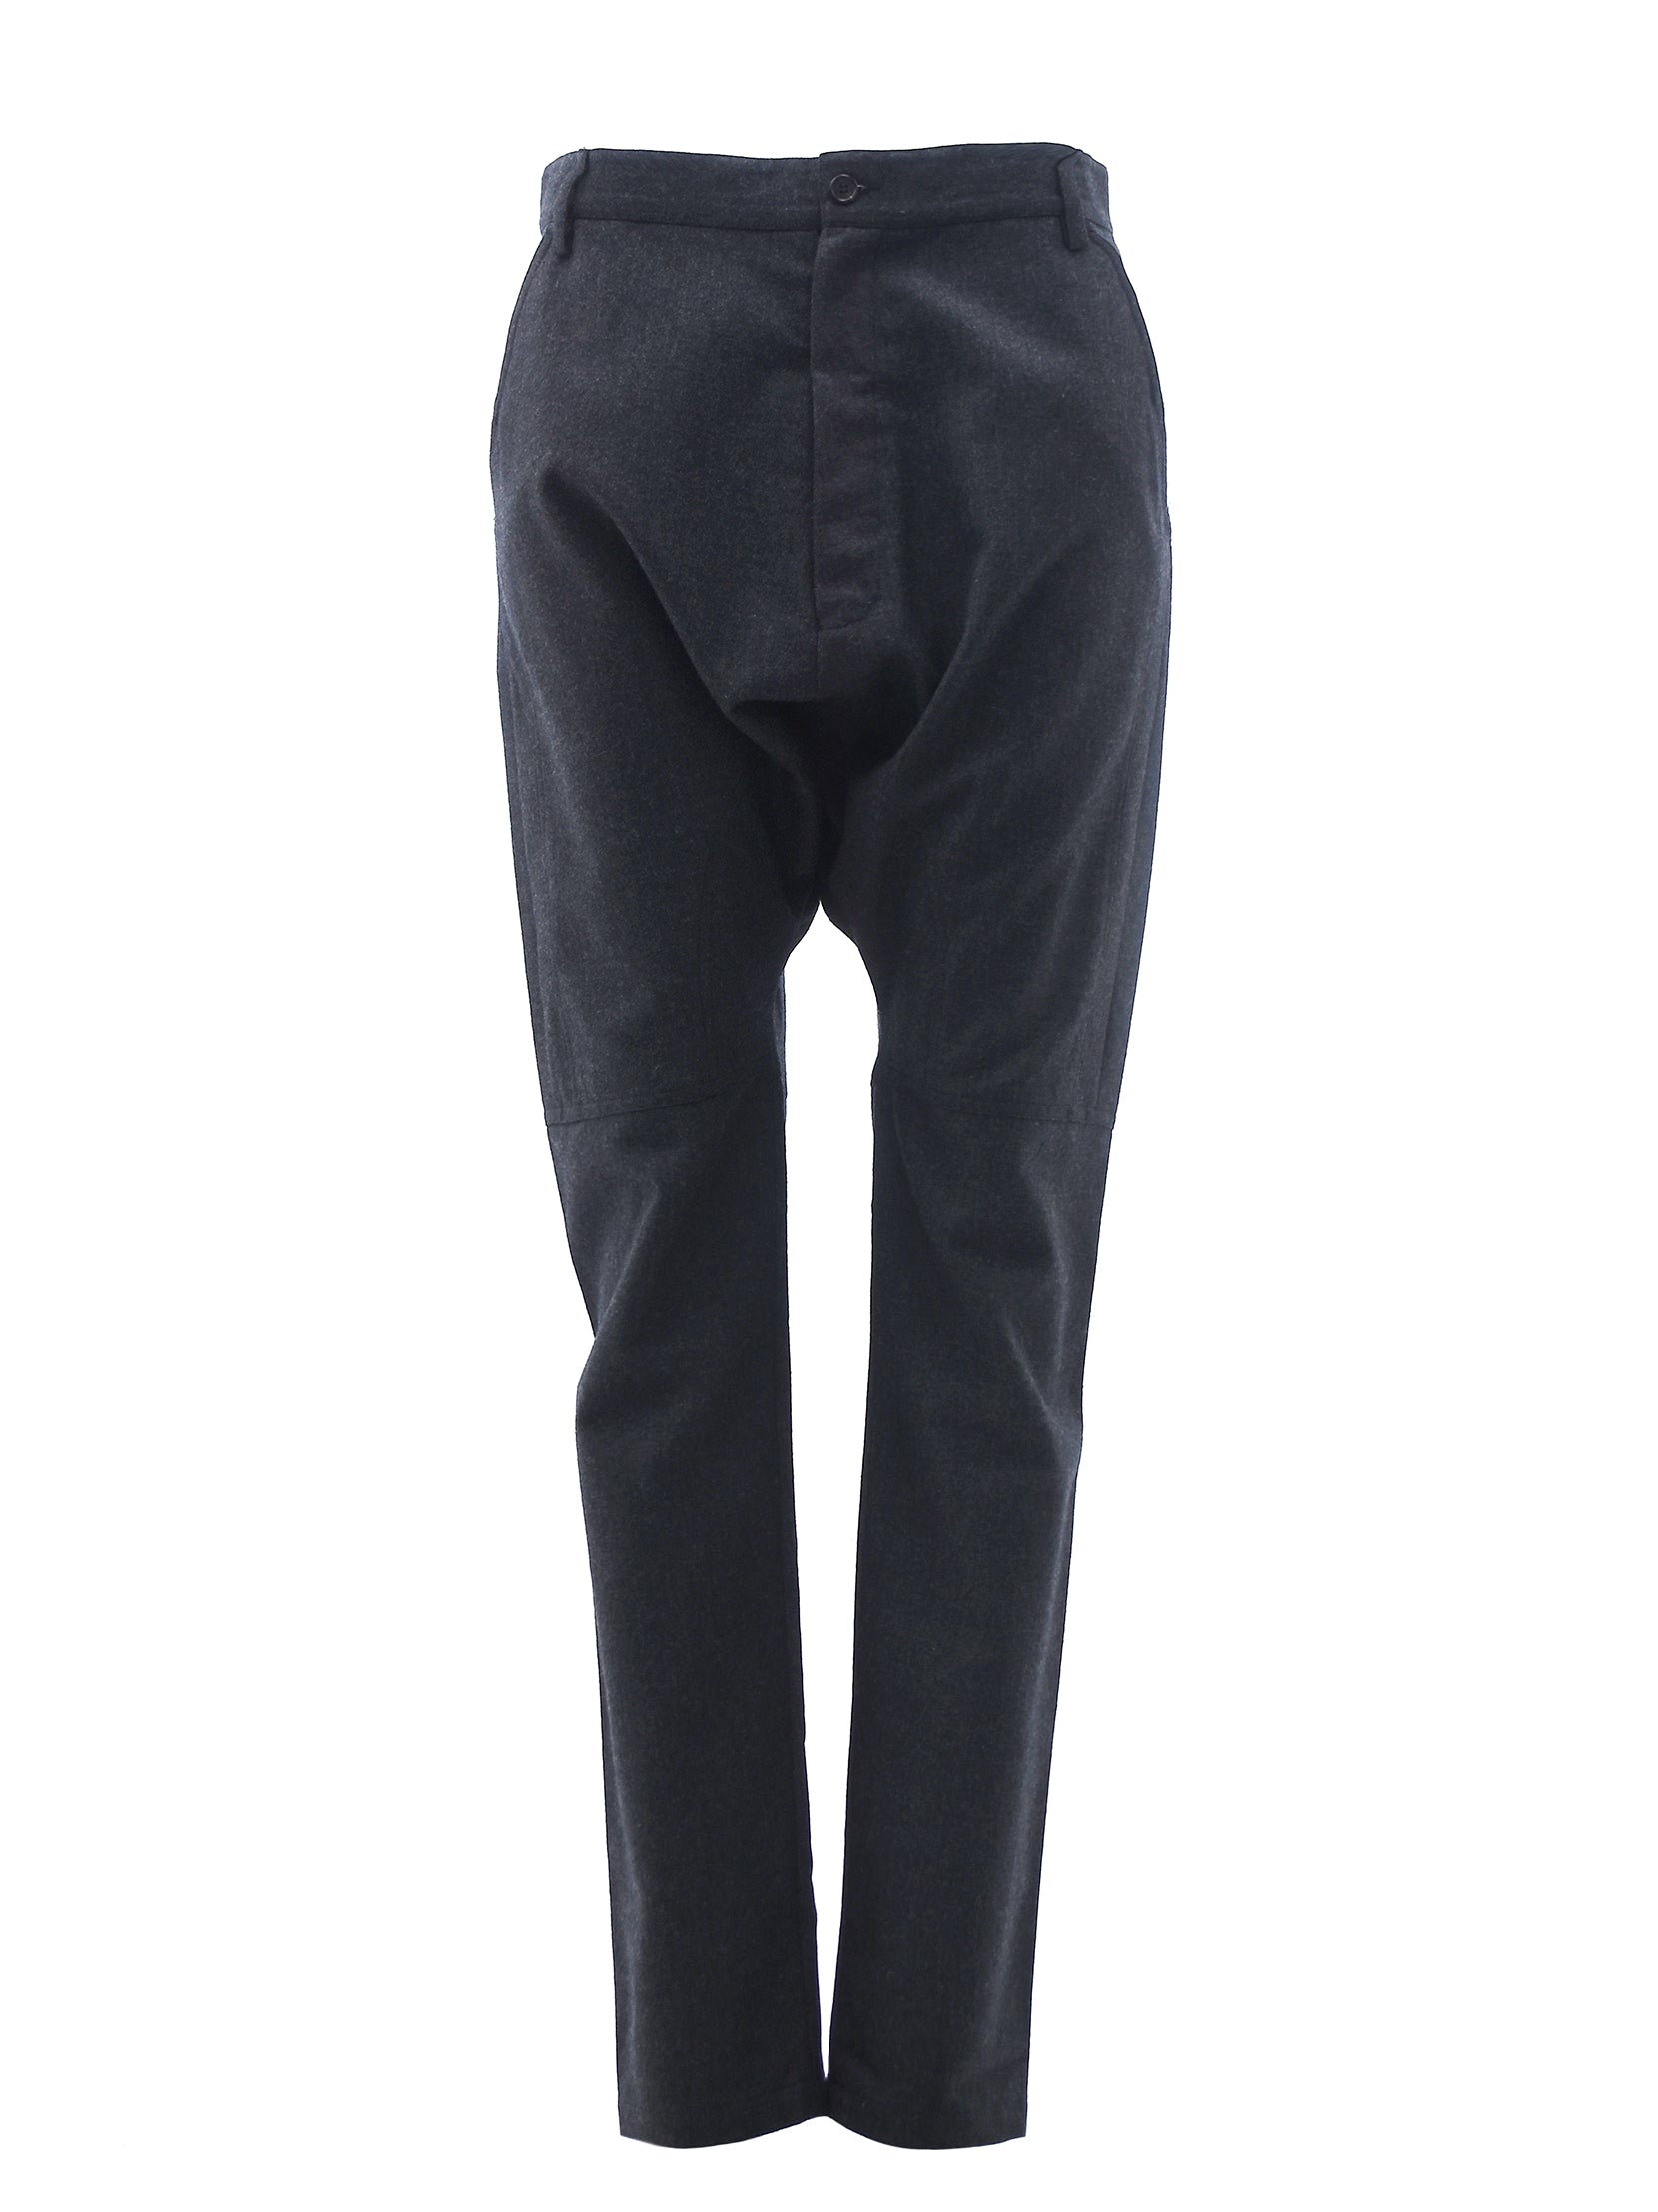 CHARCOAL WOOL SUIT TROUSERS